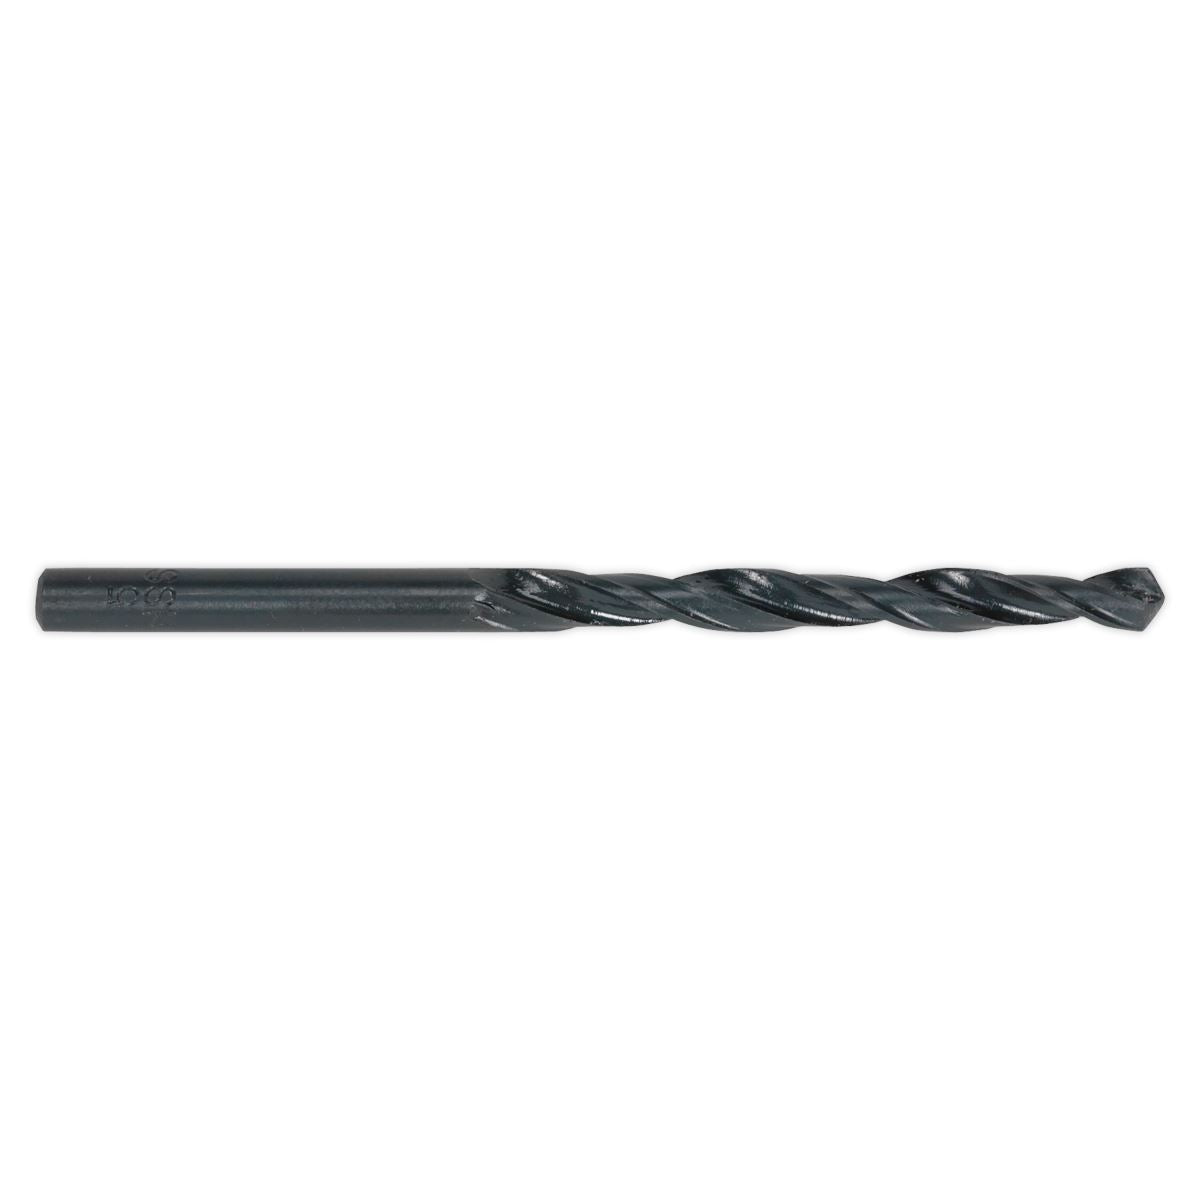 Sealey HSS Roll Forged Drill Bit Ø12mm Pack of 5